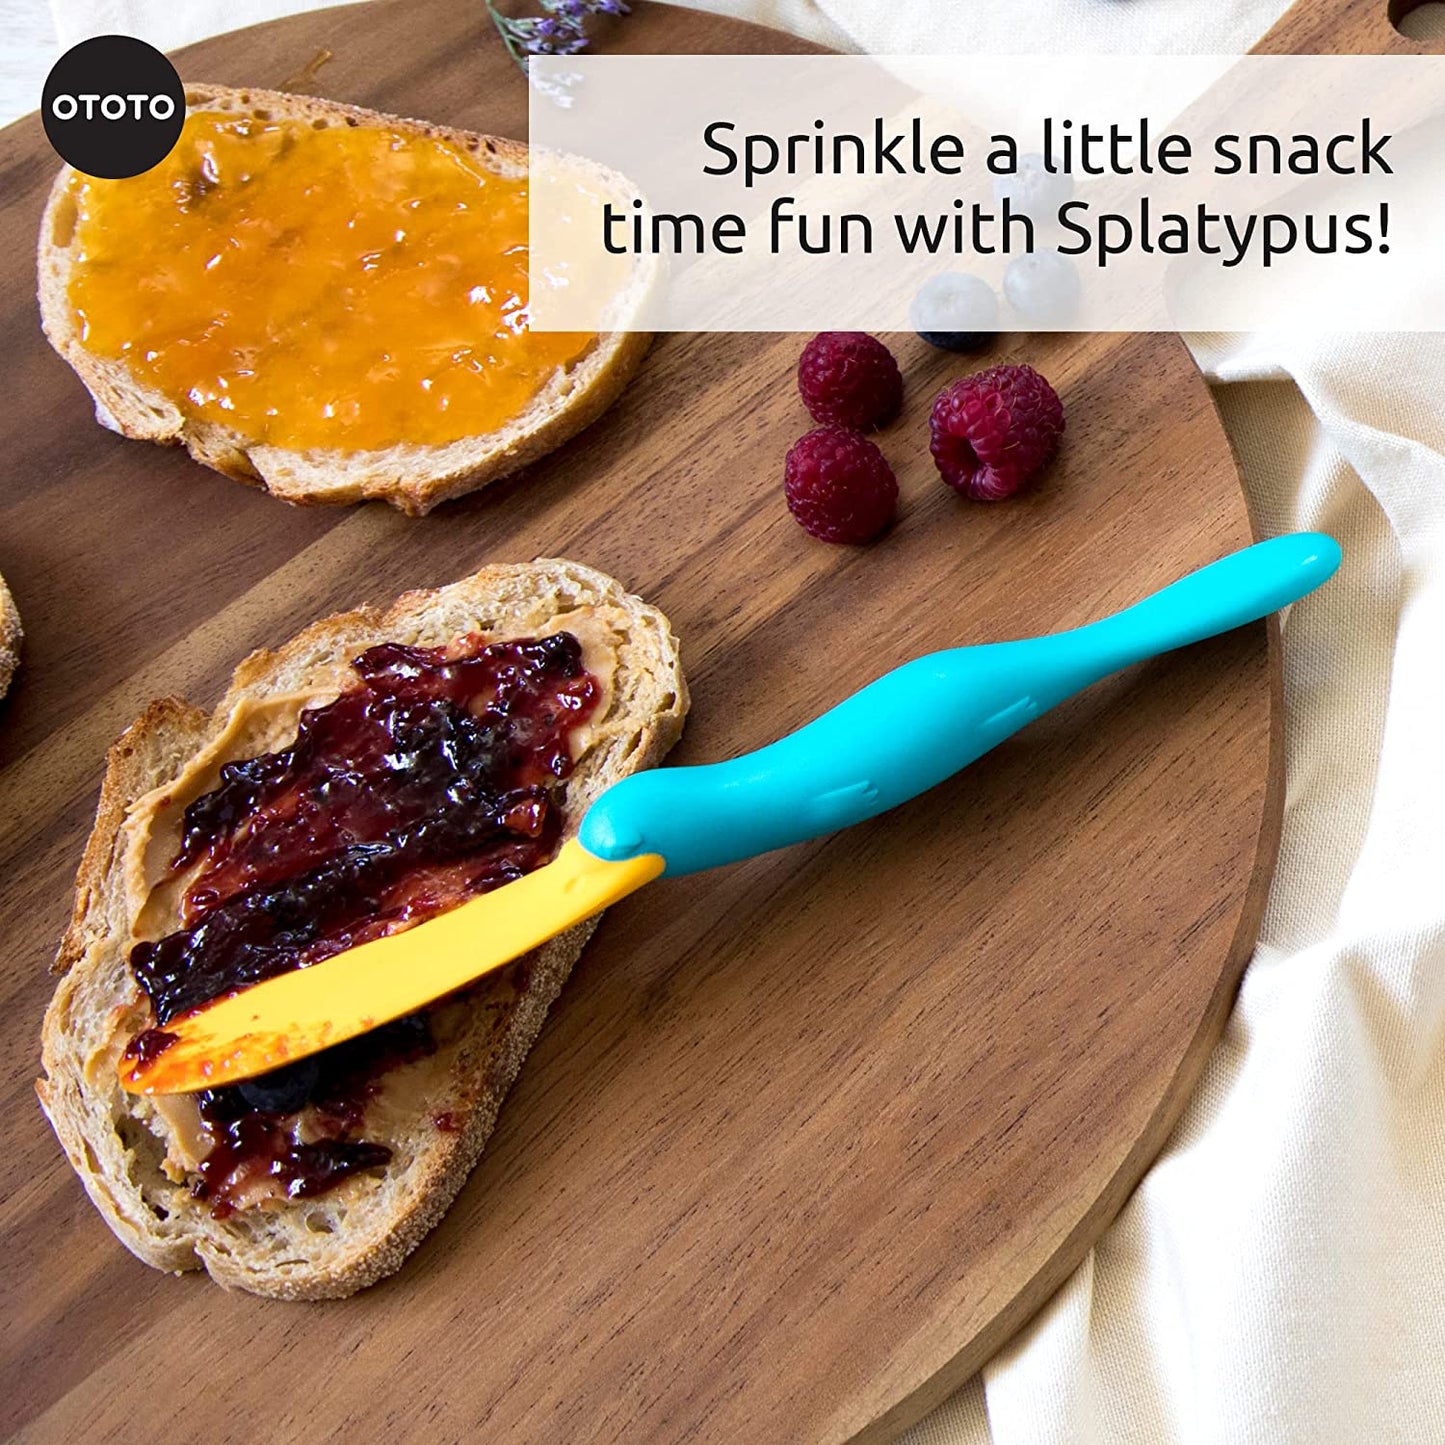 A kitchen scraper spatula called Splatypus is resting on a piece of toast covered in jam on a wooden platter.